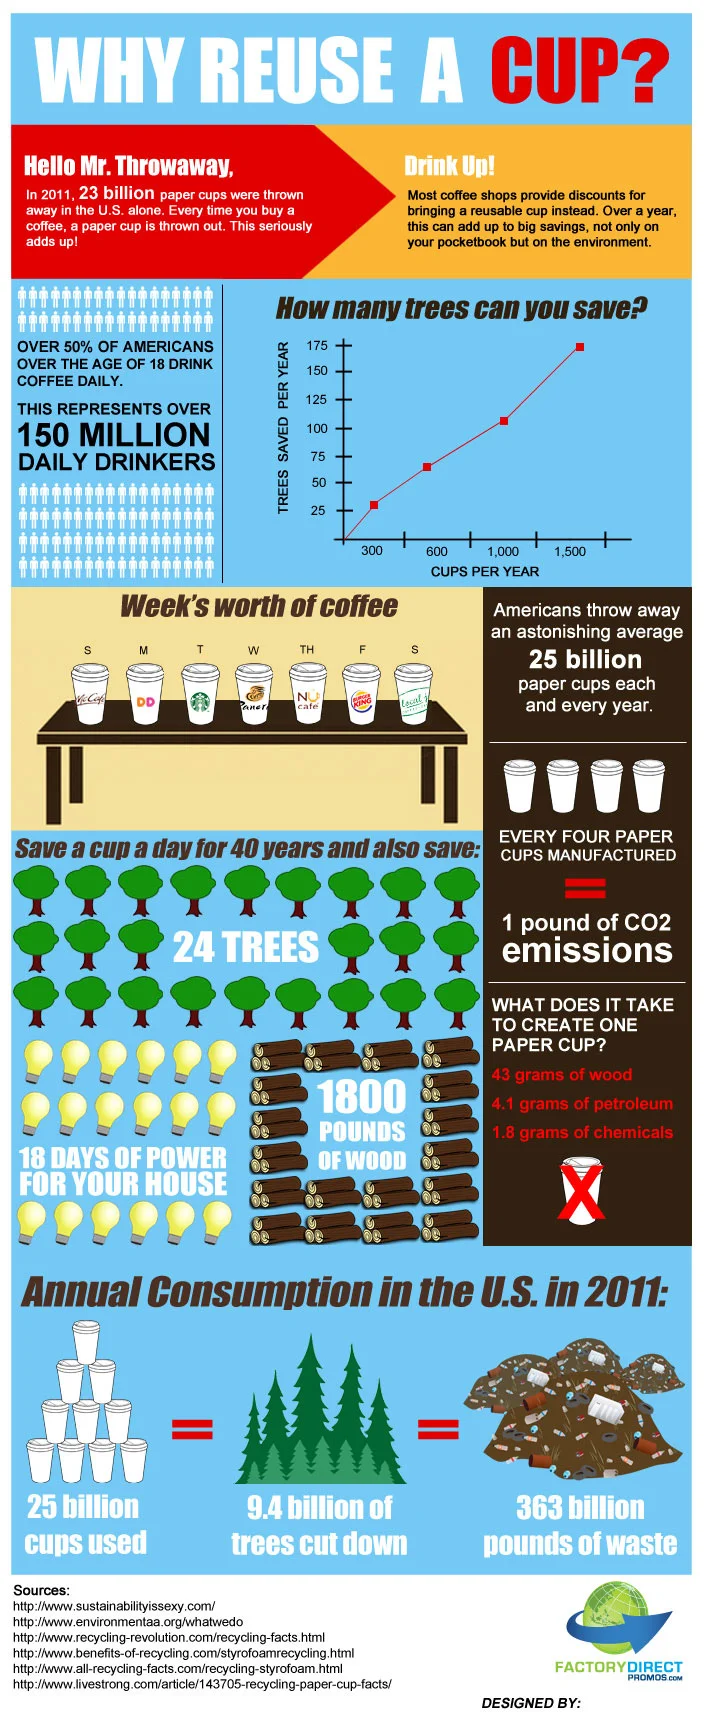 Why Reuse a Cup?